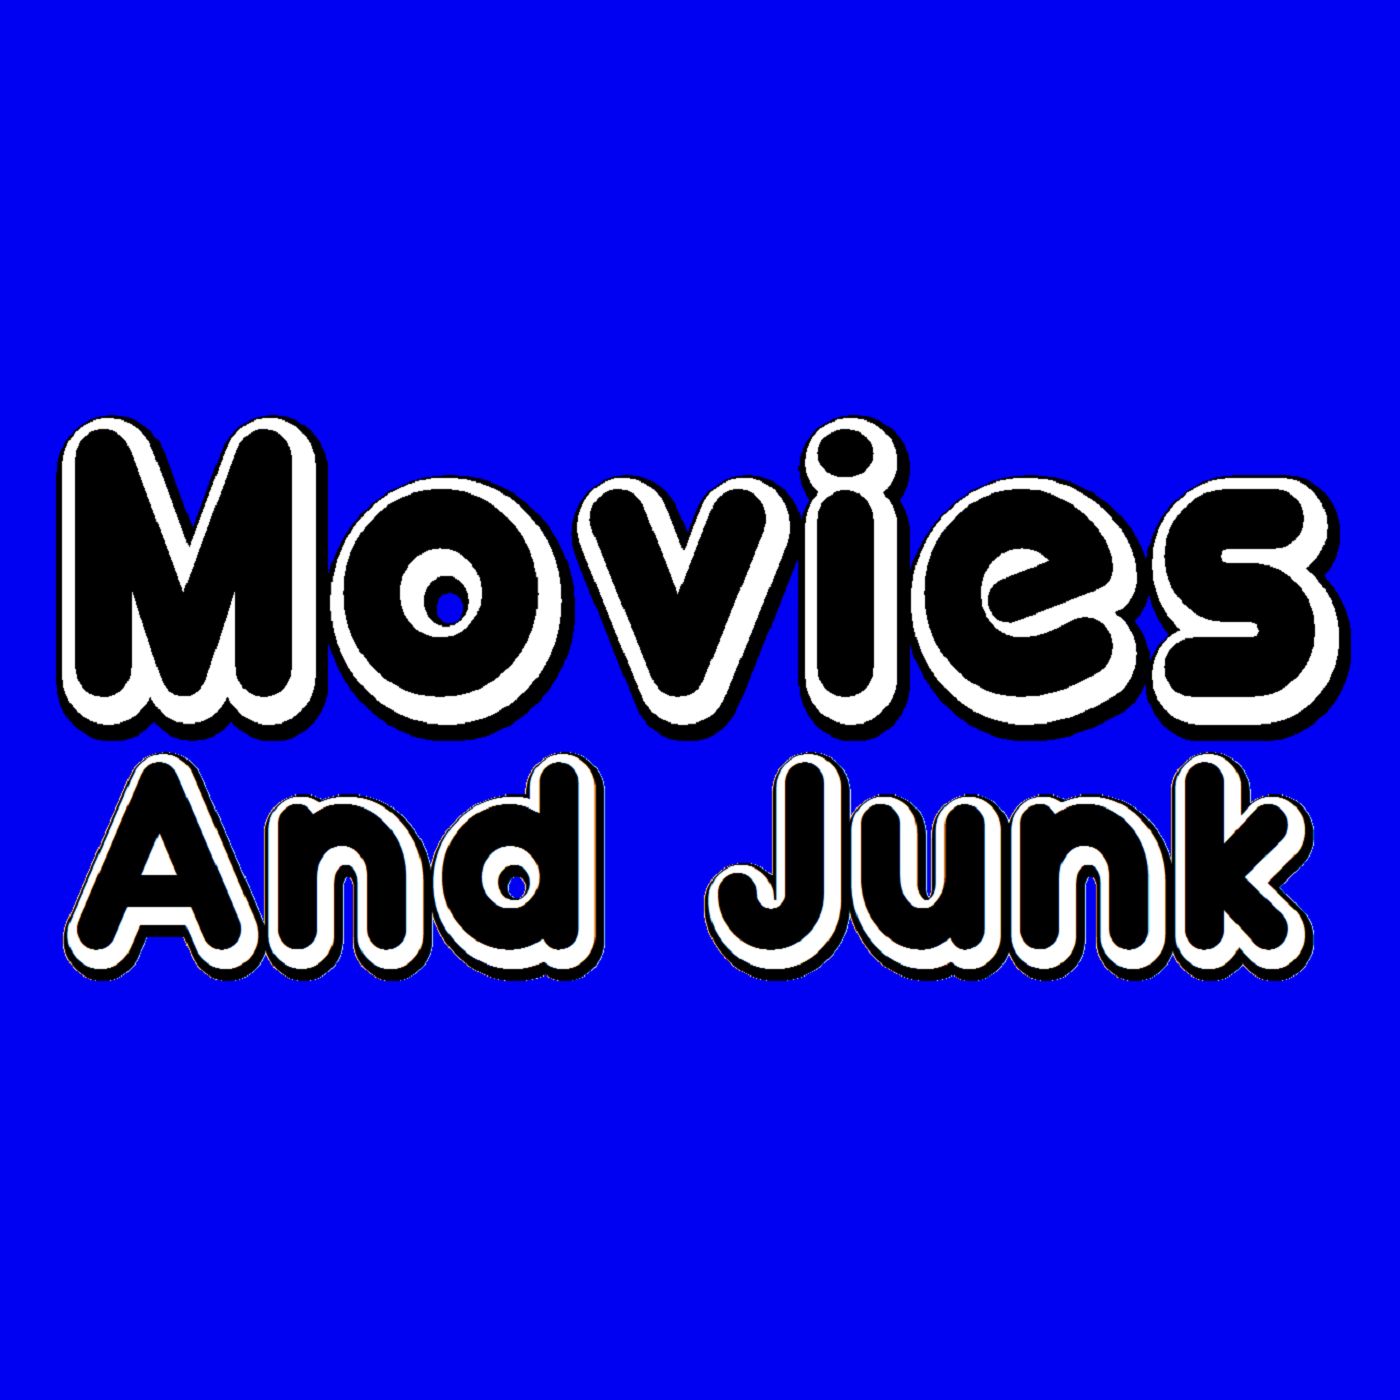 Movies and Junk